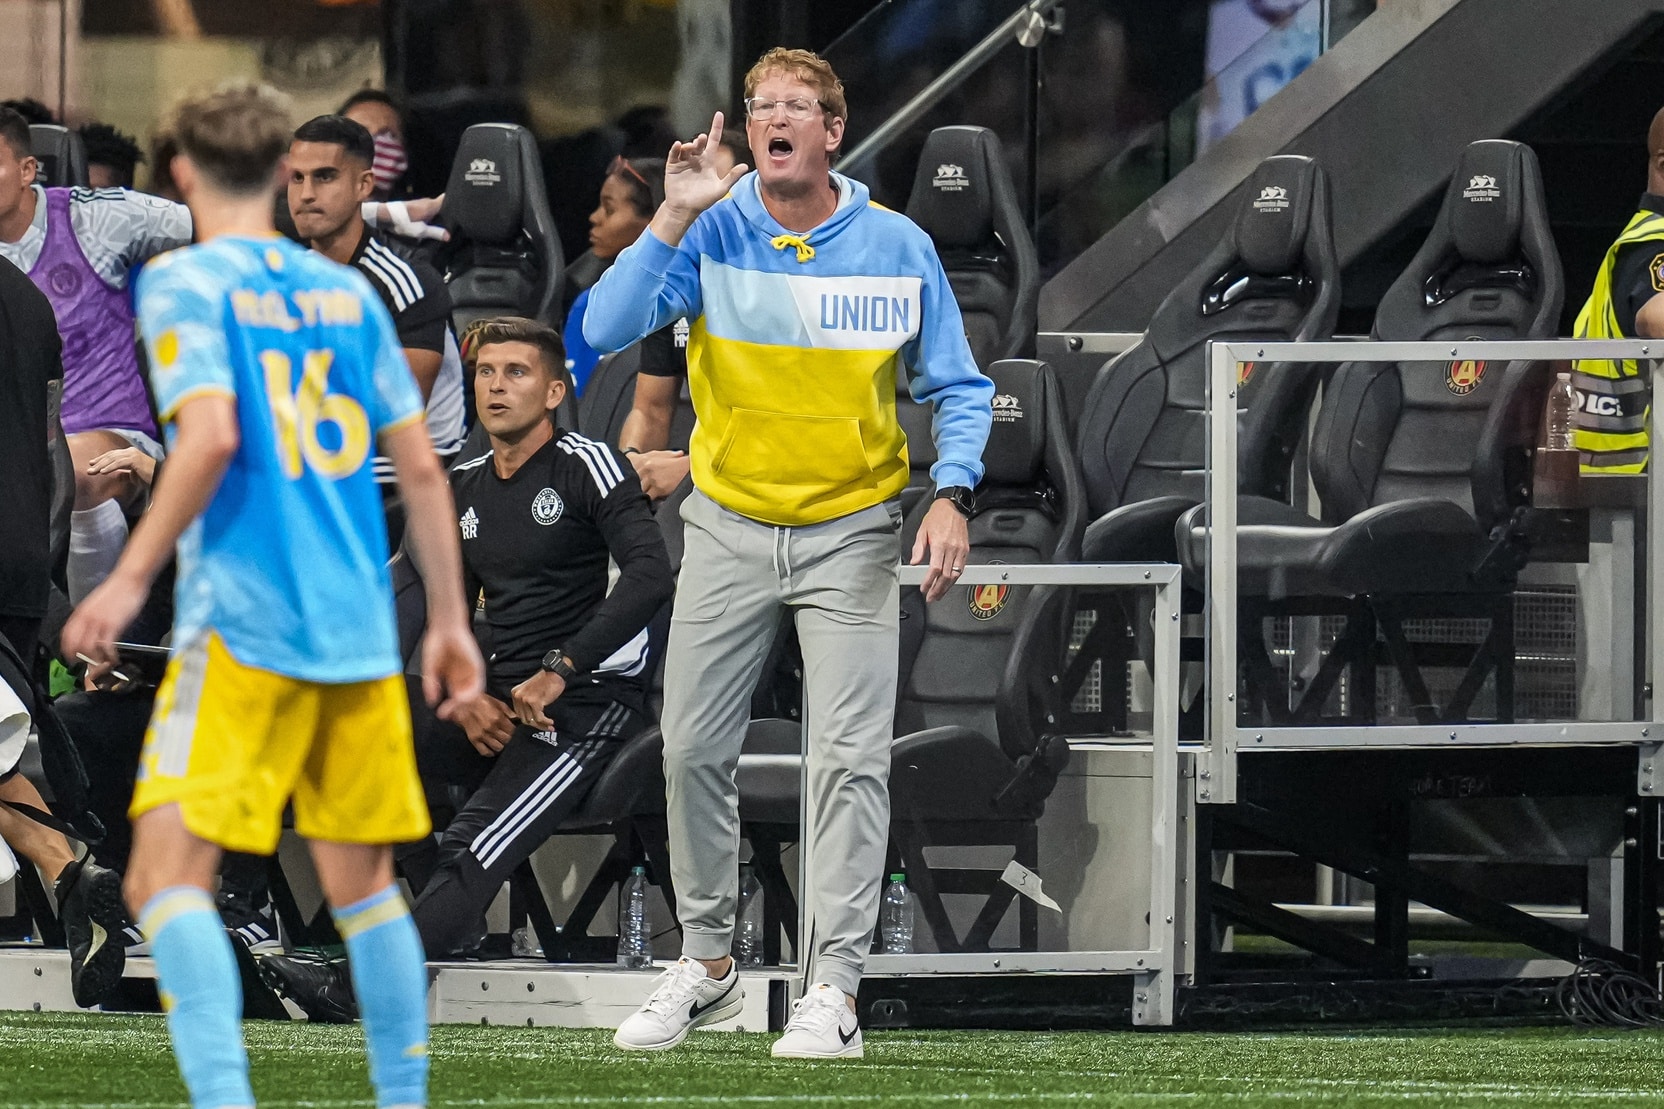 Jim Curtin Wins MLS Coach of the Year by a 0.1% Margin